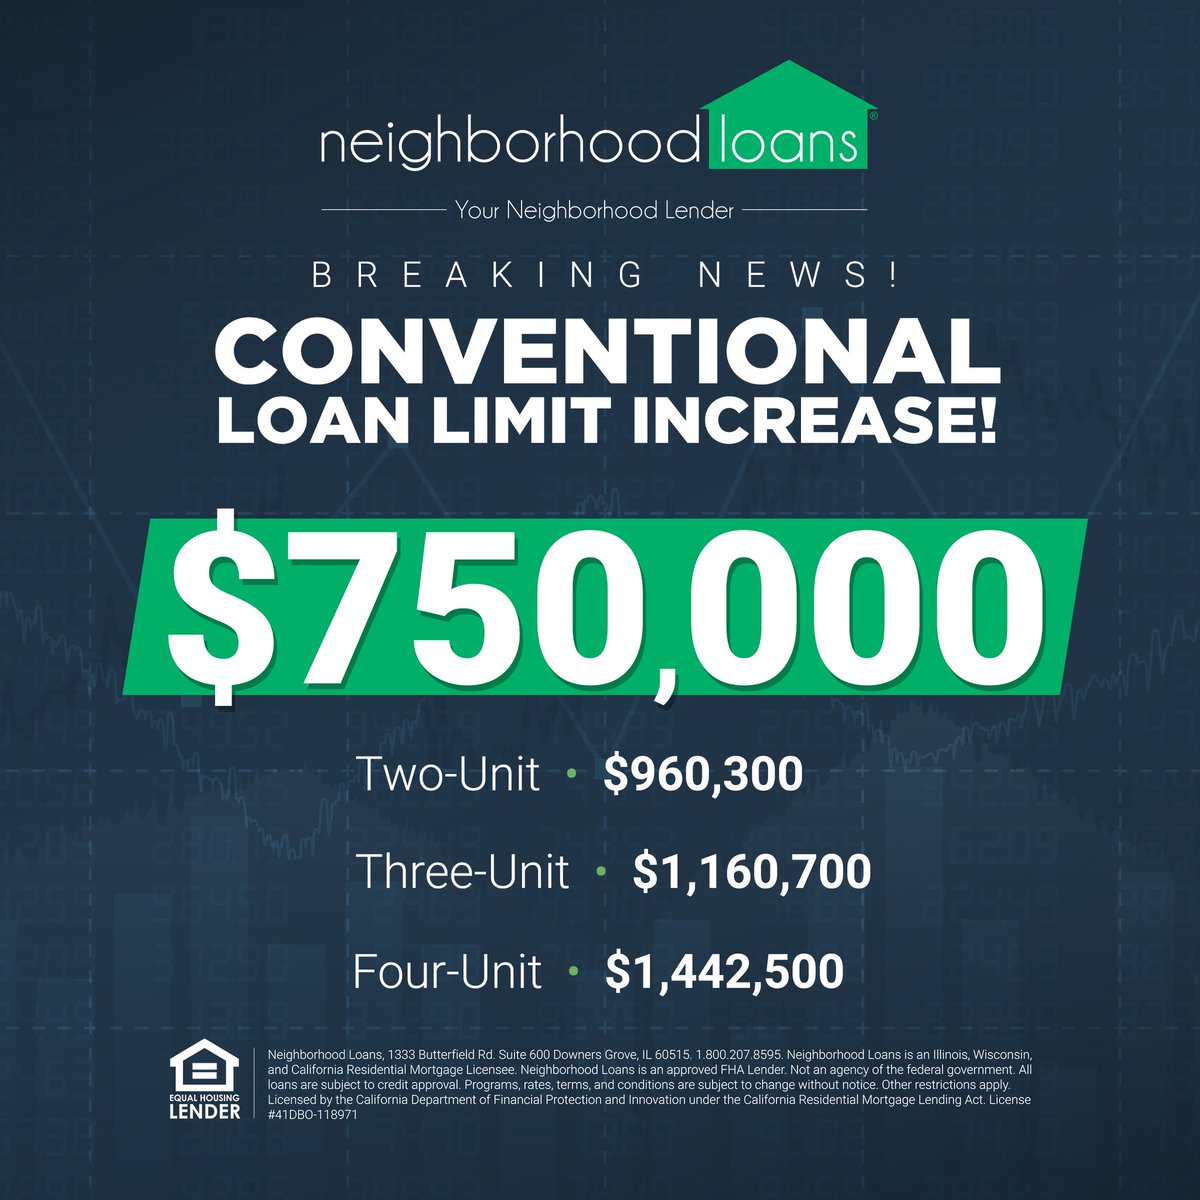 New conventional loan limits just announced. Call or text me 708-945-6424 for all your mortgage needs